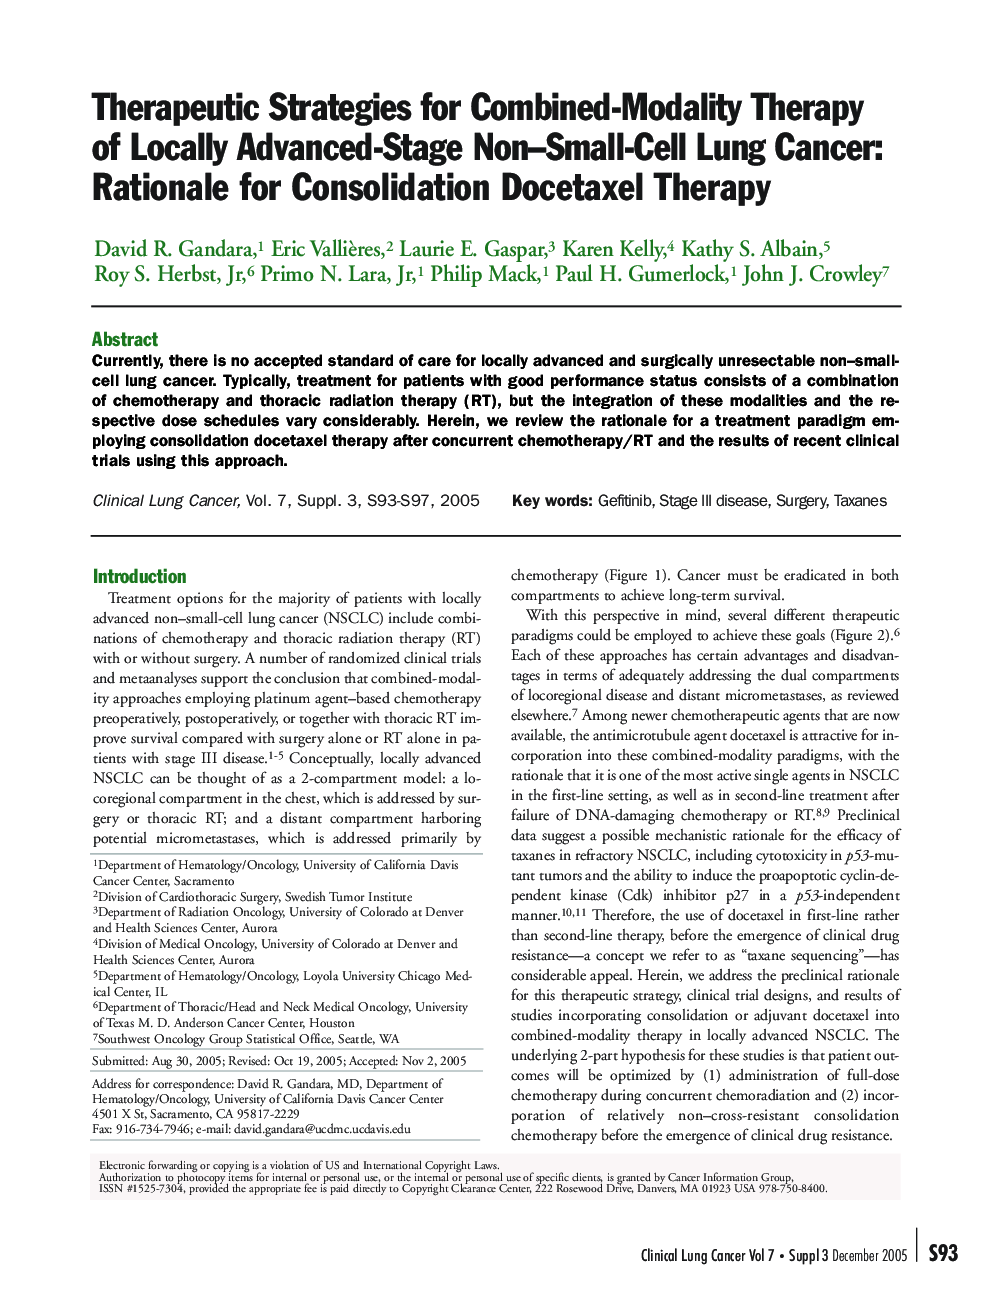 Therapeutic Strategies for Combined-Modality Therapy of Locally Advanced-Stage Non-Small-Cell Lung Cancer: Rationale for Consolidation Docetaxel Therapy